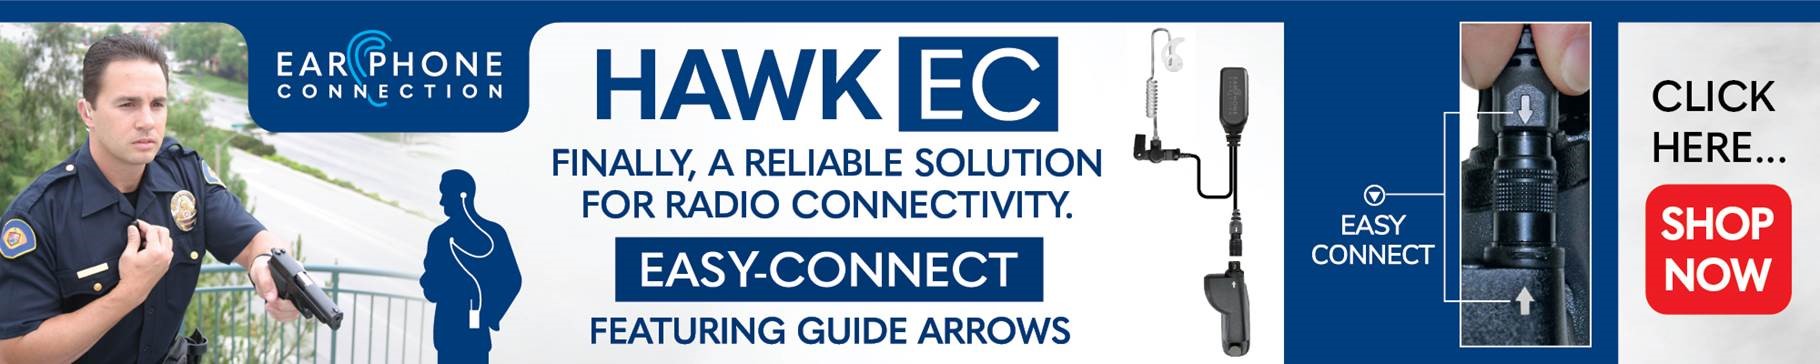 Connection, hawk ec, click here ..., finally , a reliable solution for radio connectivity ., eas connect, easy - connect, shop now, featuring guide arrows